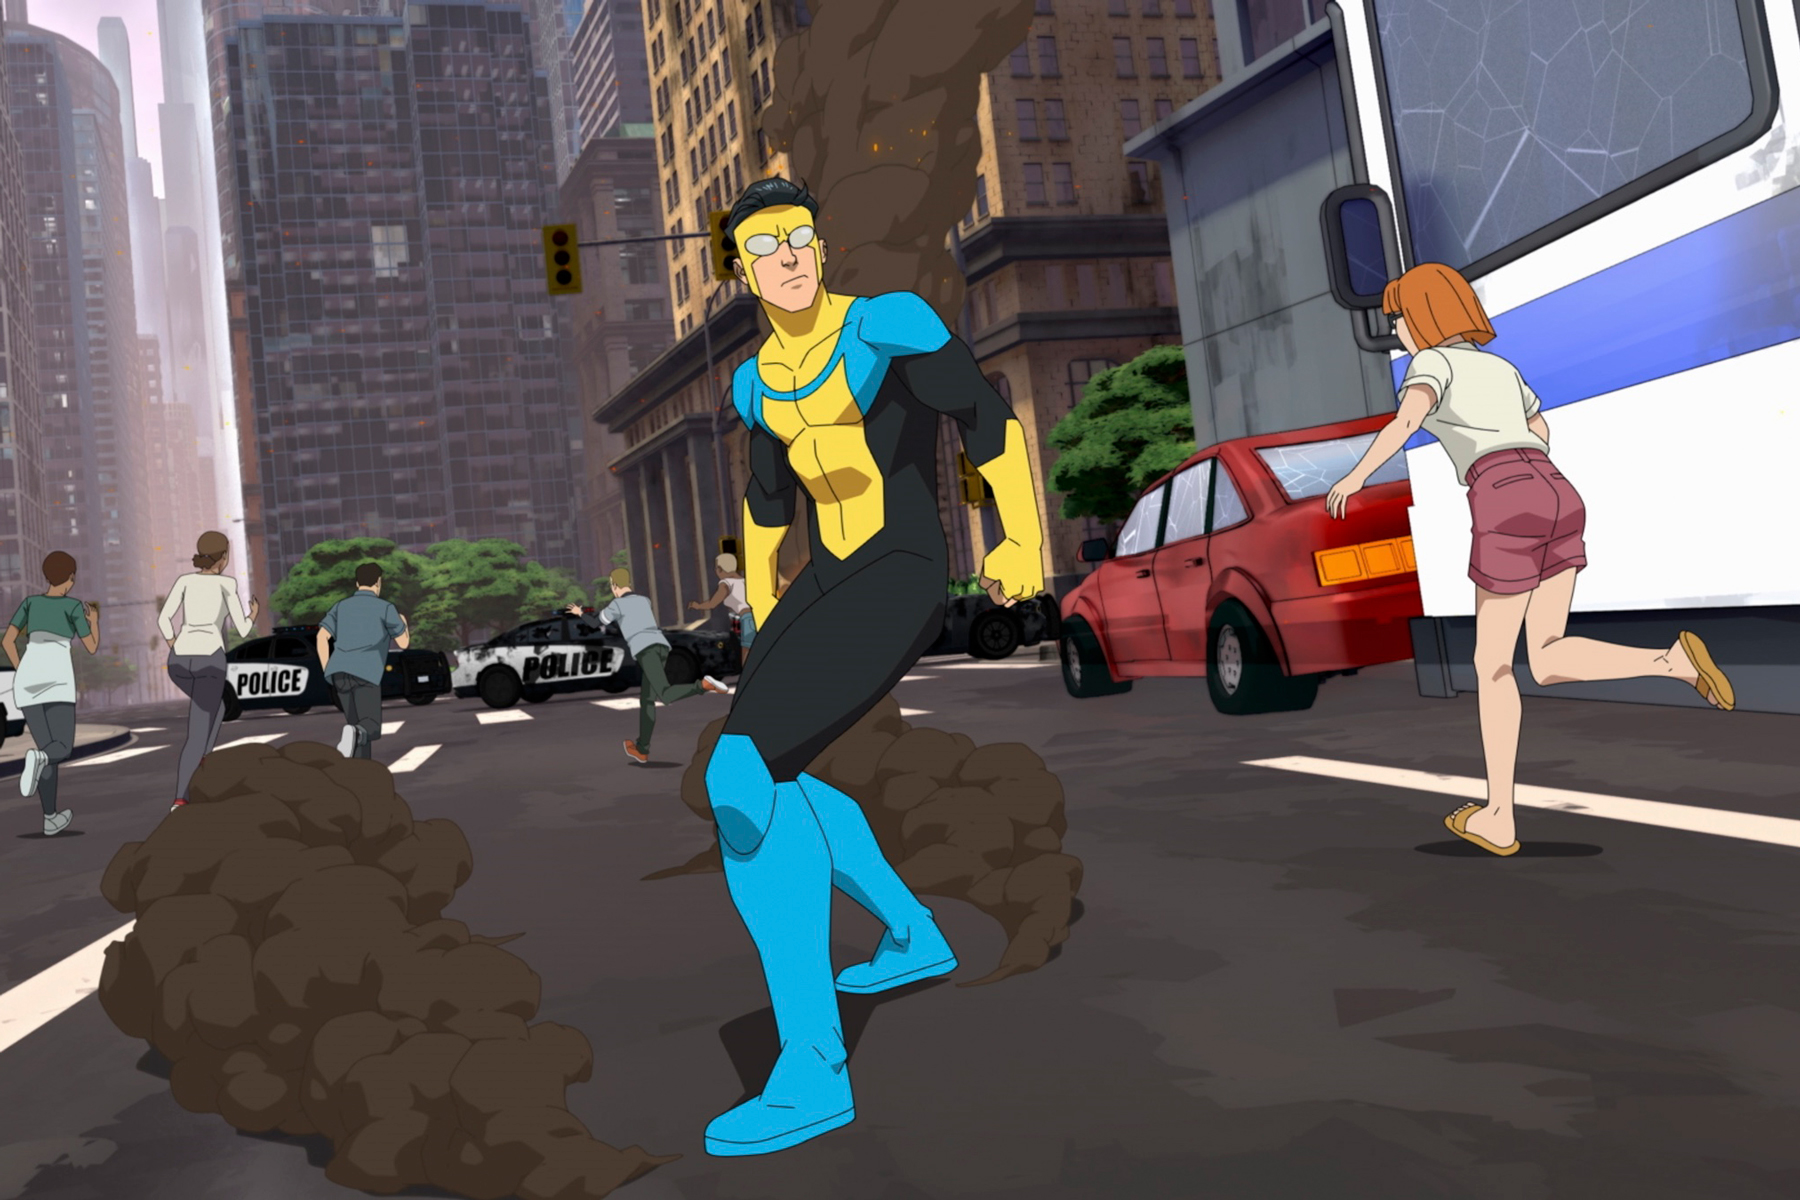 Invincible': A Teen Superhero Tries to Fill His Dad's Boots